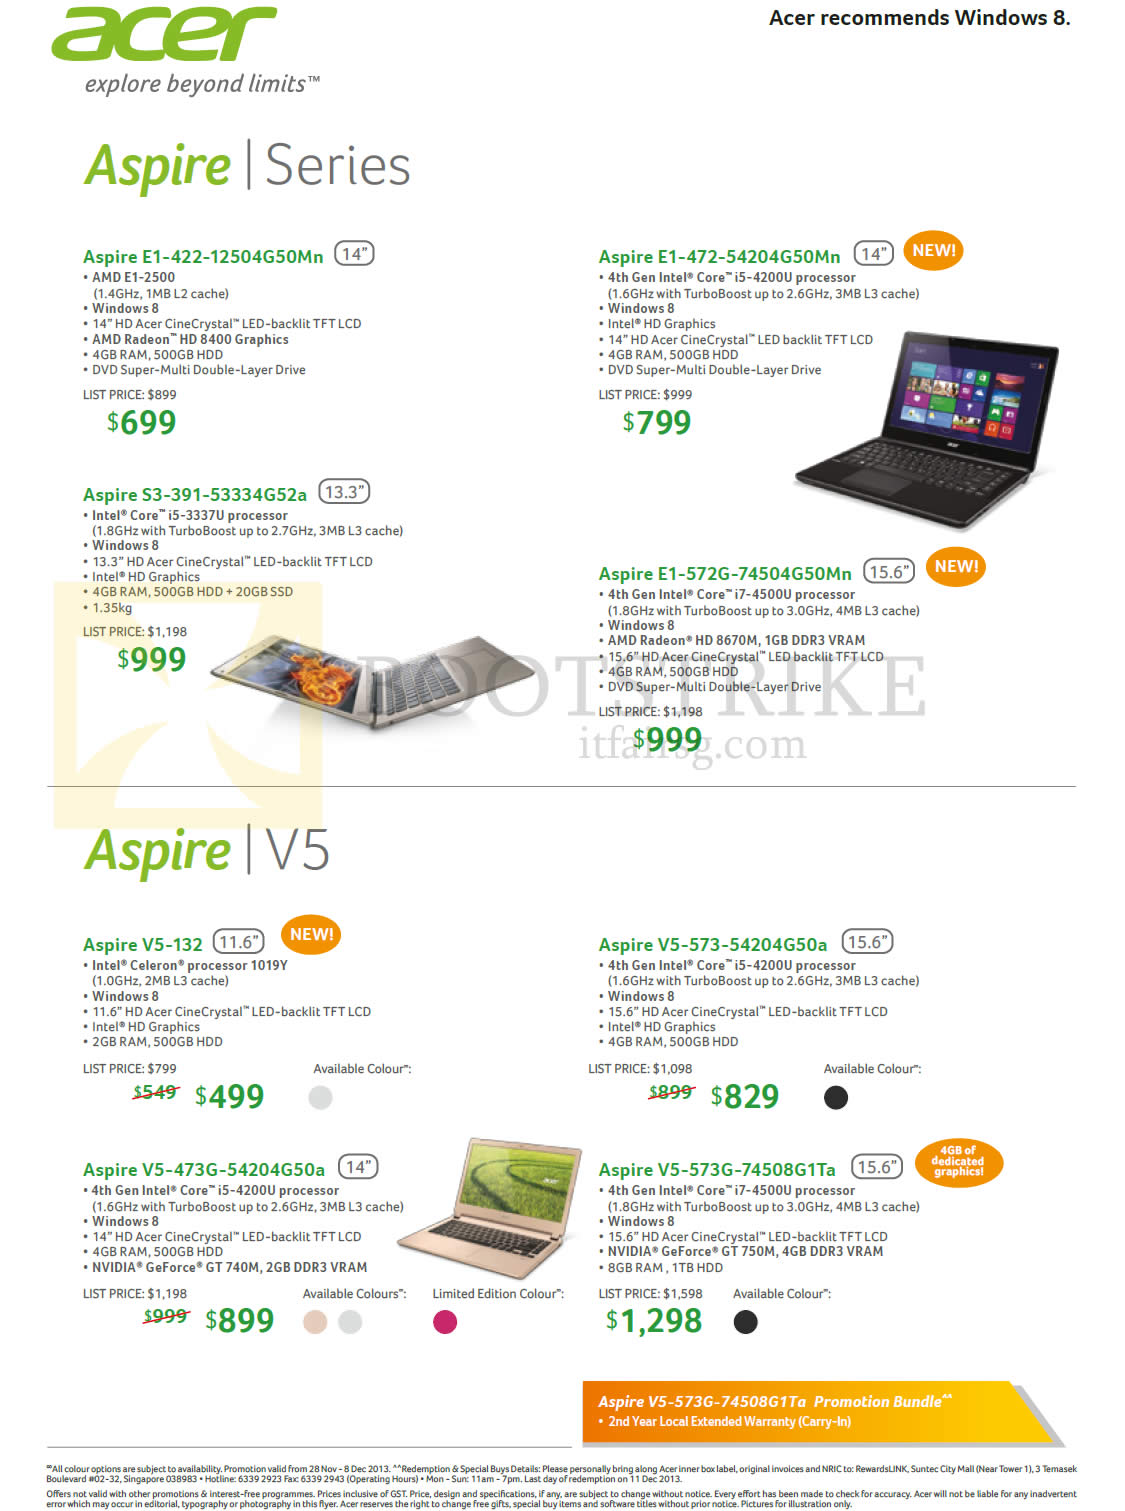 SITEX 2013 price list image brochure of Acer Notebooks Aspire E1-422-12504G50Mn, 472-5420G450Mn, S3-391-53334G52a, E1-572G-74504G50Mn, V5-132, 573-54204G50a, V5-473G-54204G50a, 573G-74508G1Ta